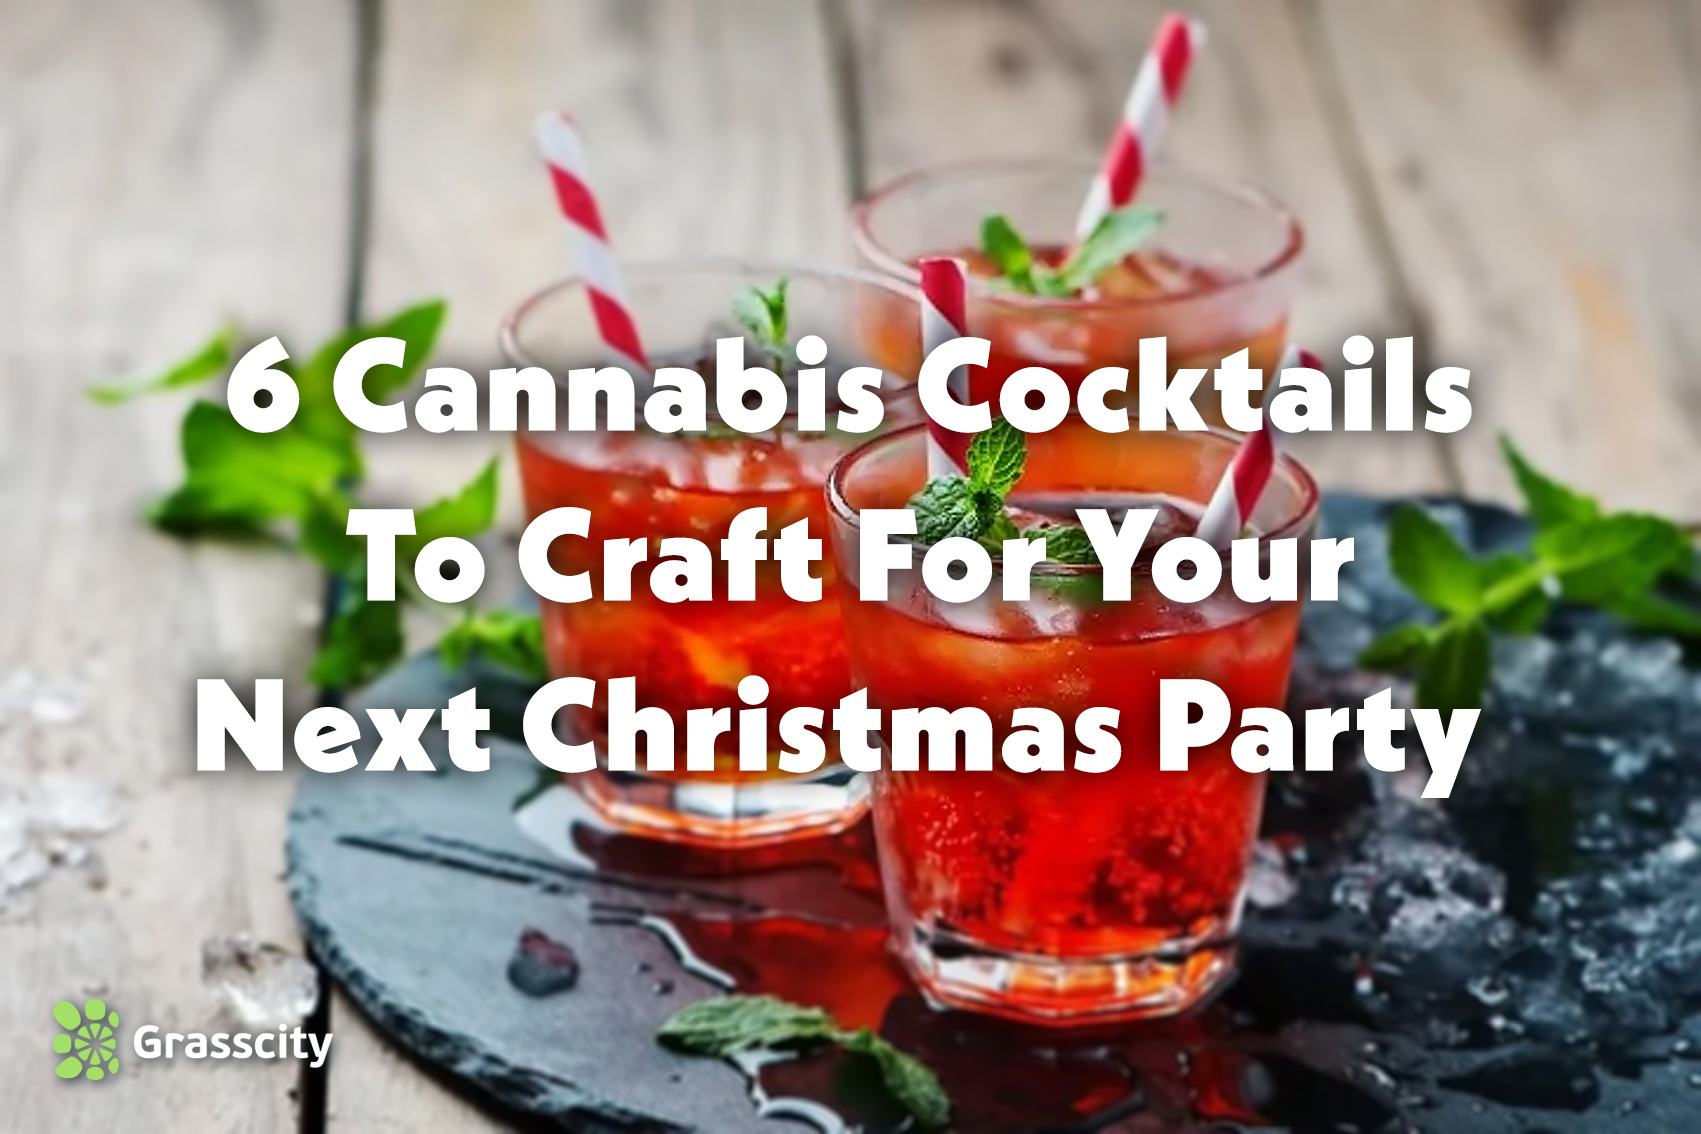 6 Cannabis Cocktails To Craft For Your Next Christmas Party